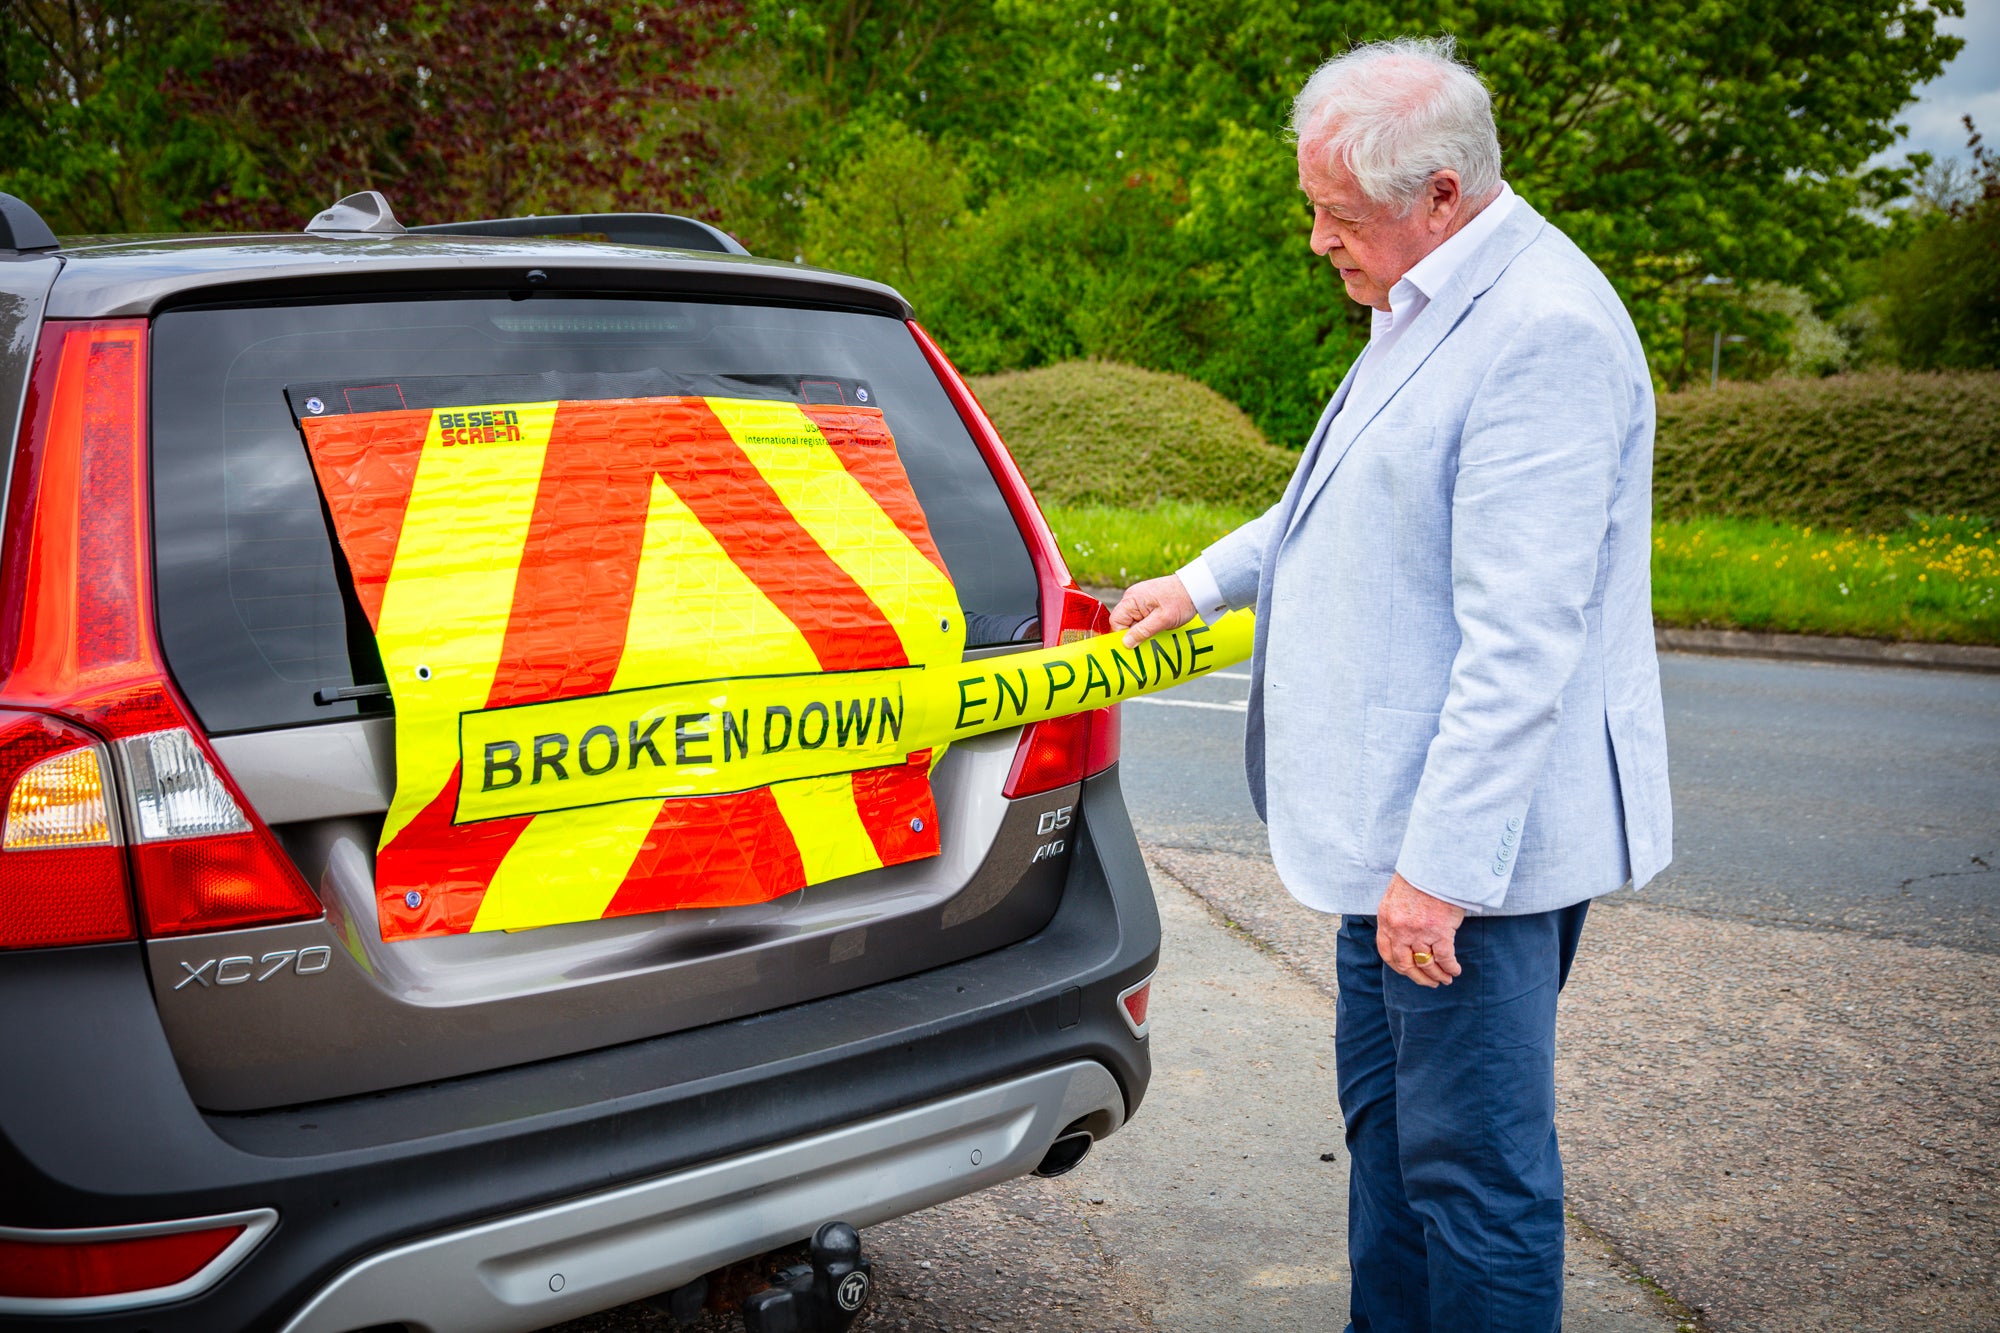 Car Safety Banner (Be Seen Screen) Safety Triangle Alternative